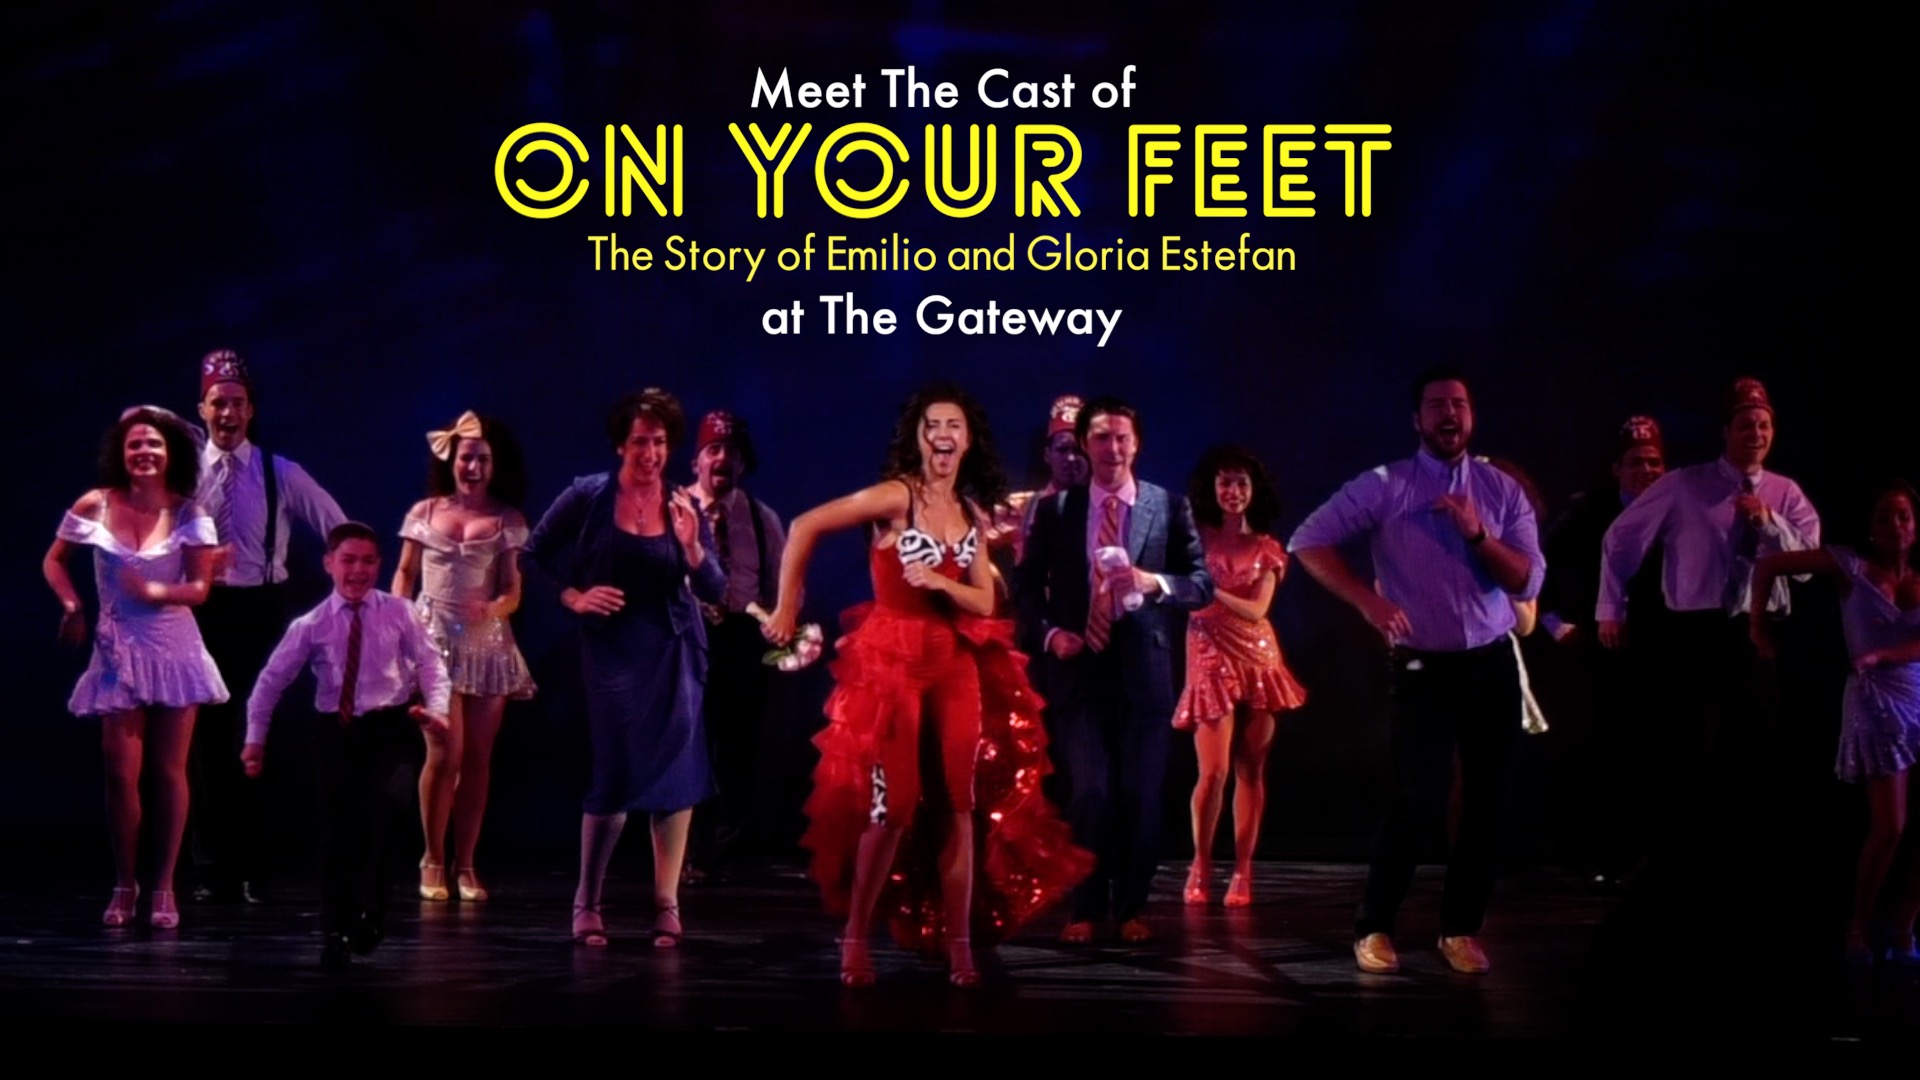 Meet The Cast of On Your Feet at The Gateway